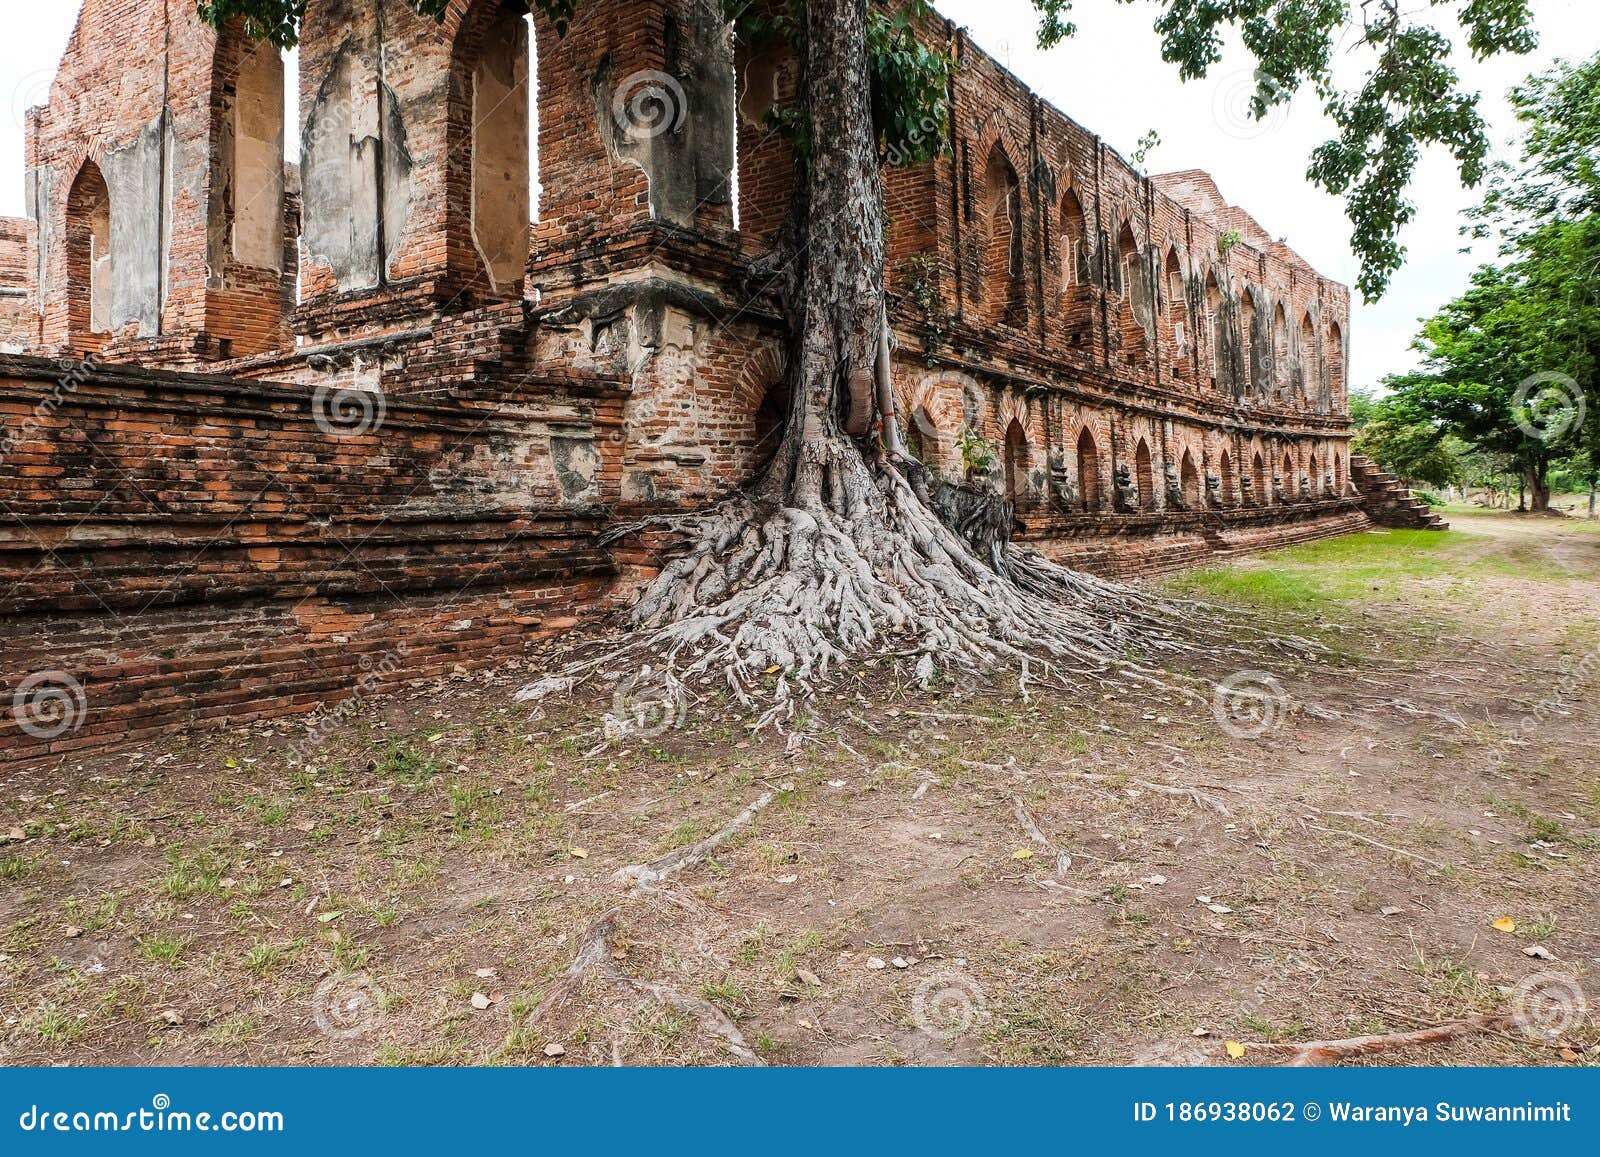 big tree with roots several decades old and the old brick wall attracts visitor, ayutthaya